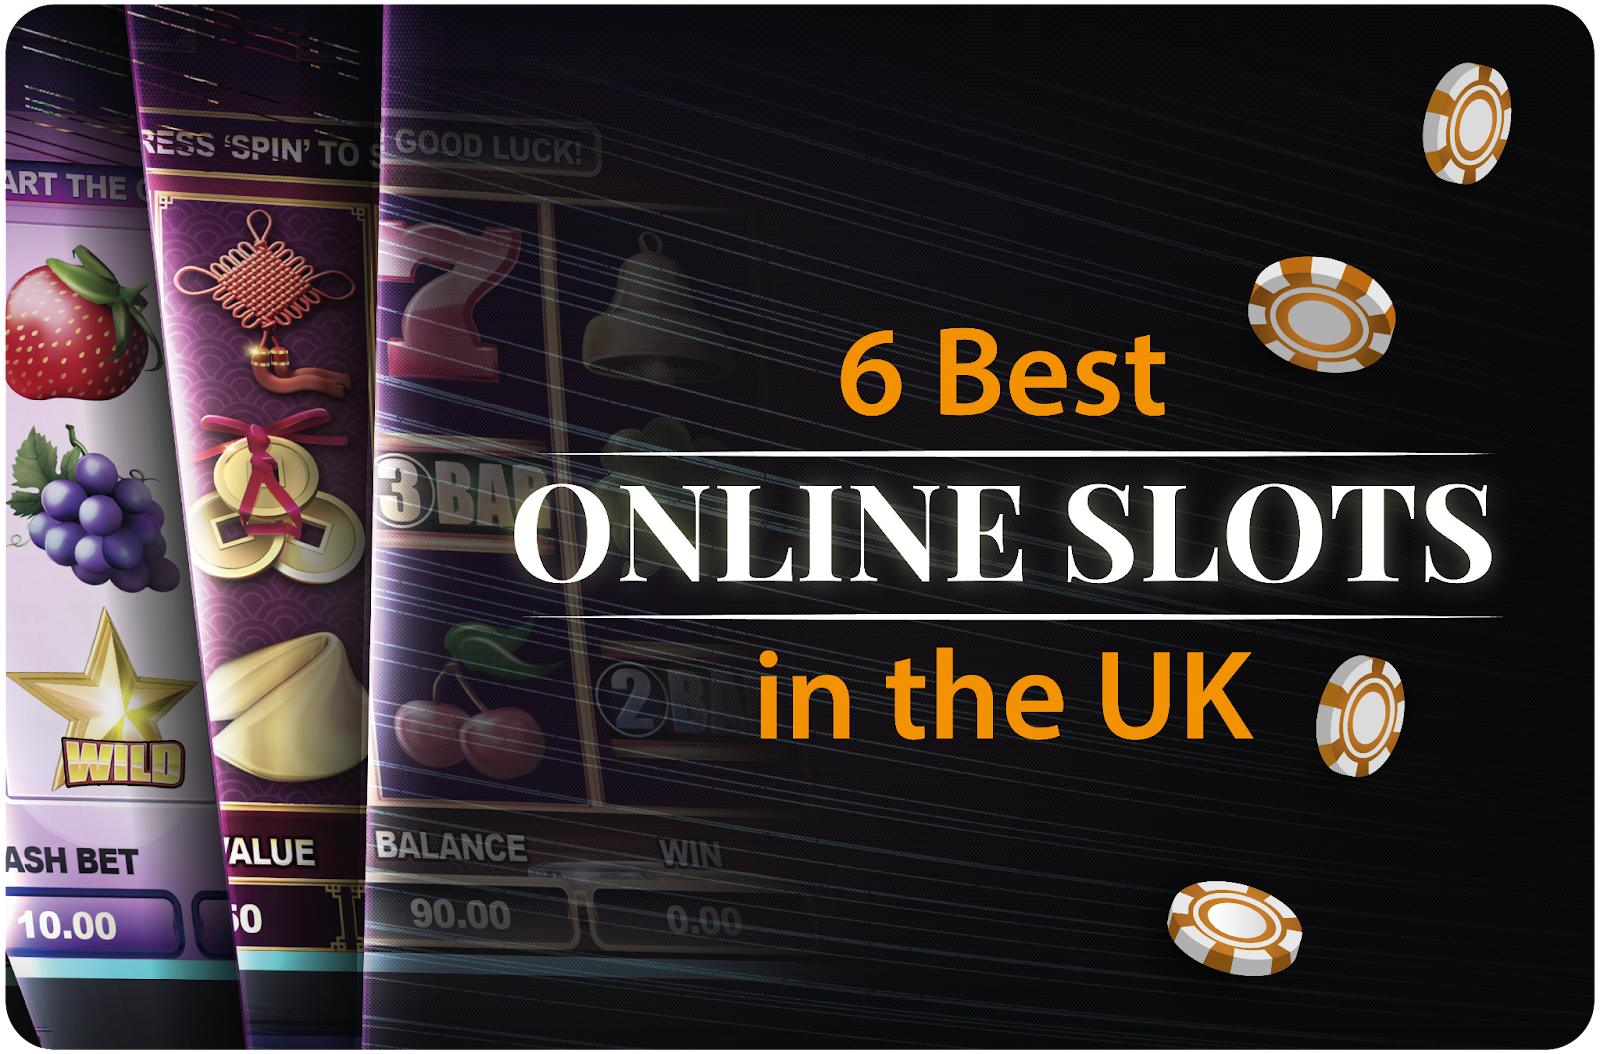 Online casino – best slot machines and games